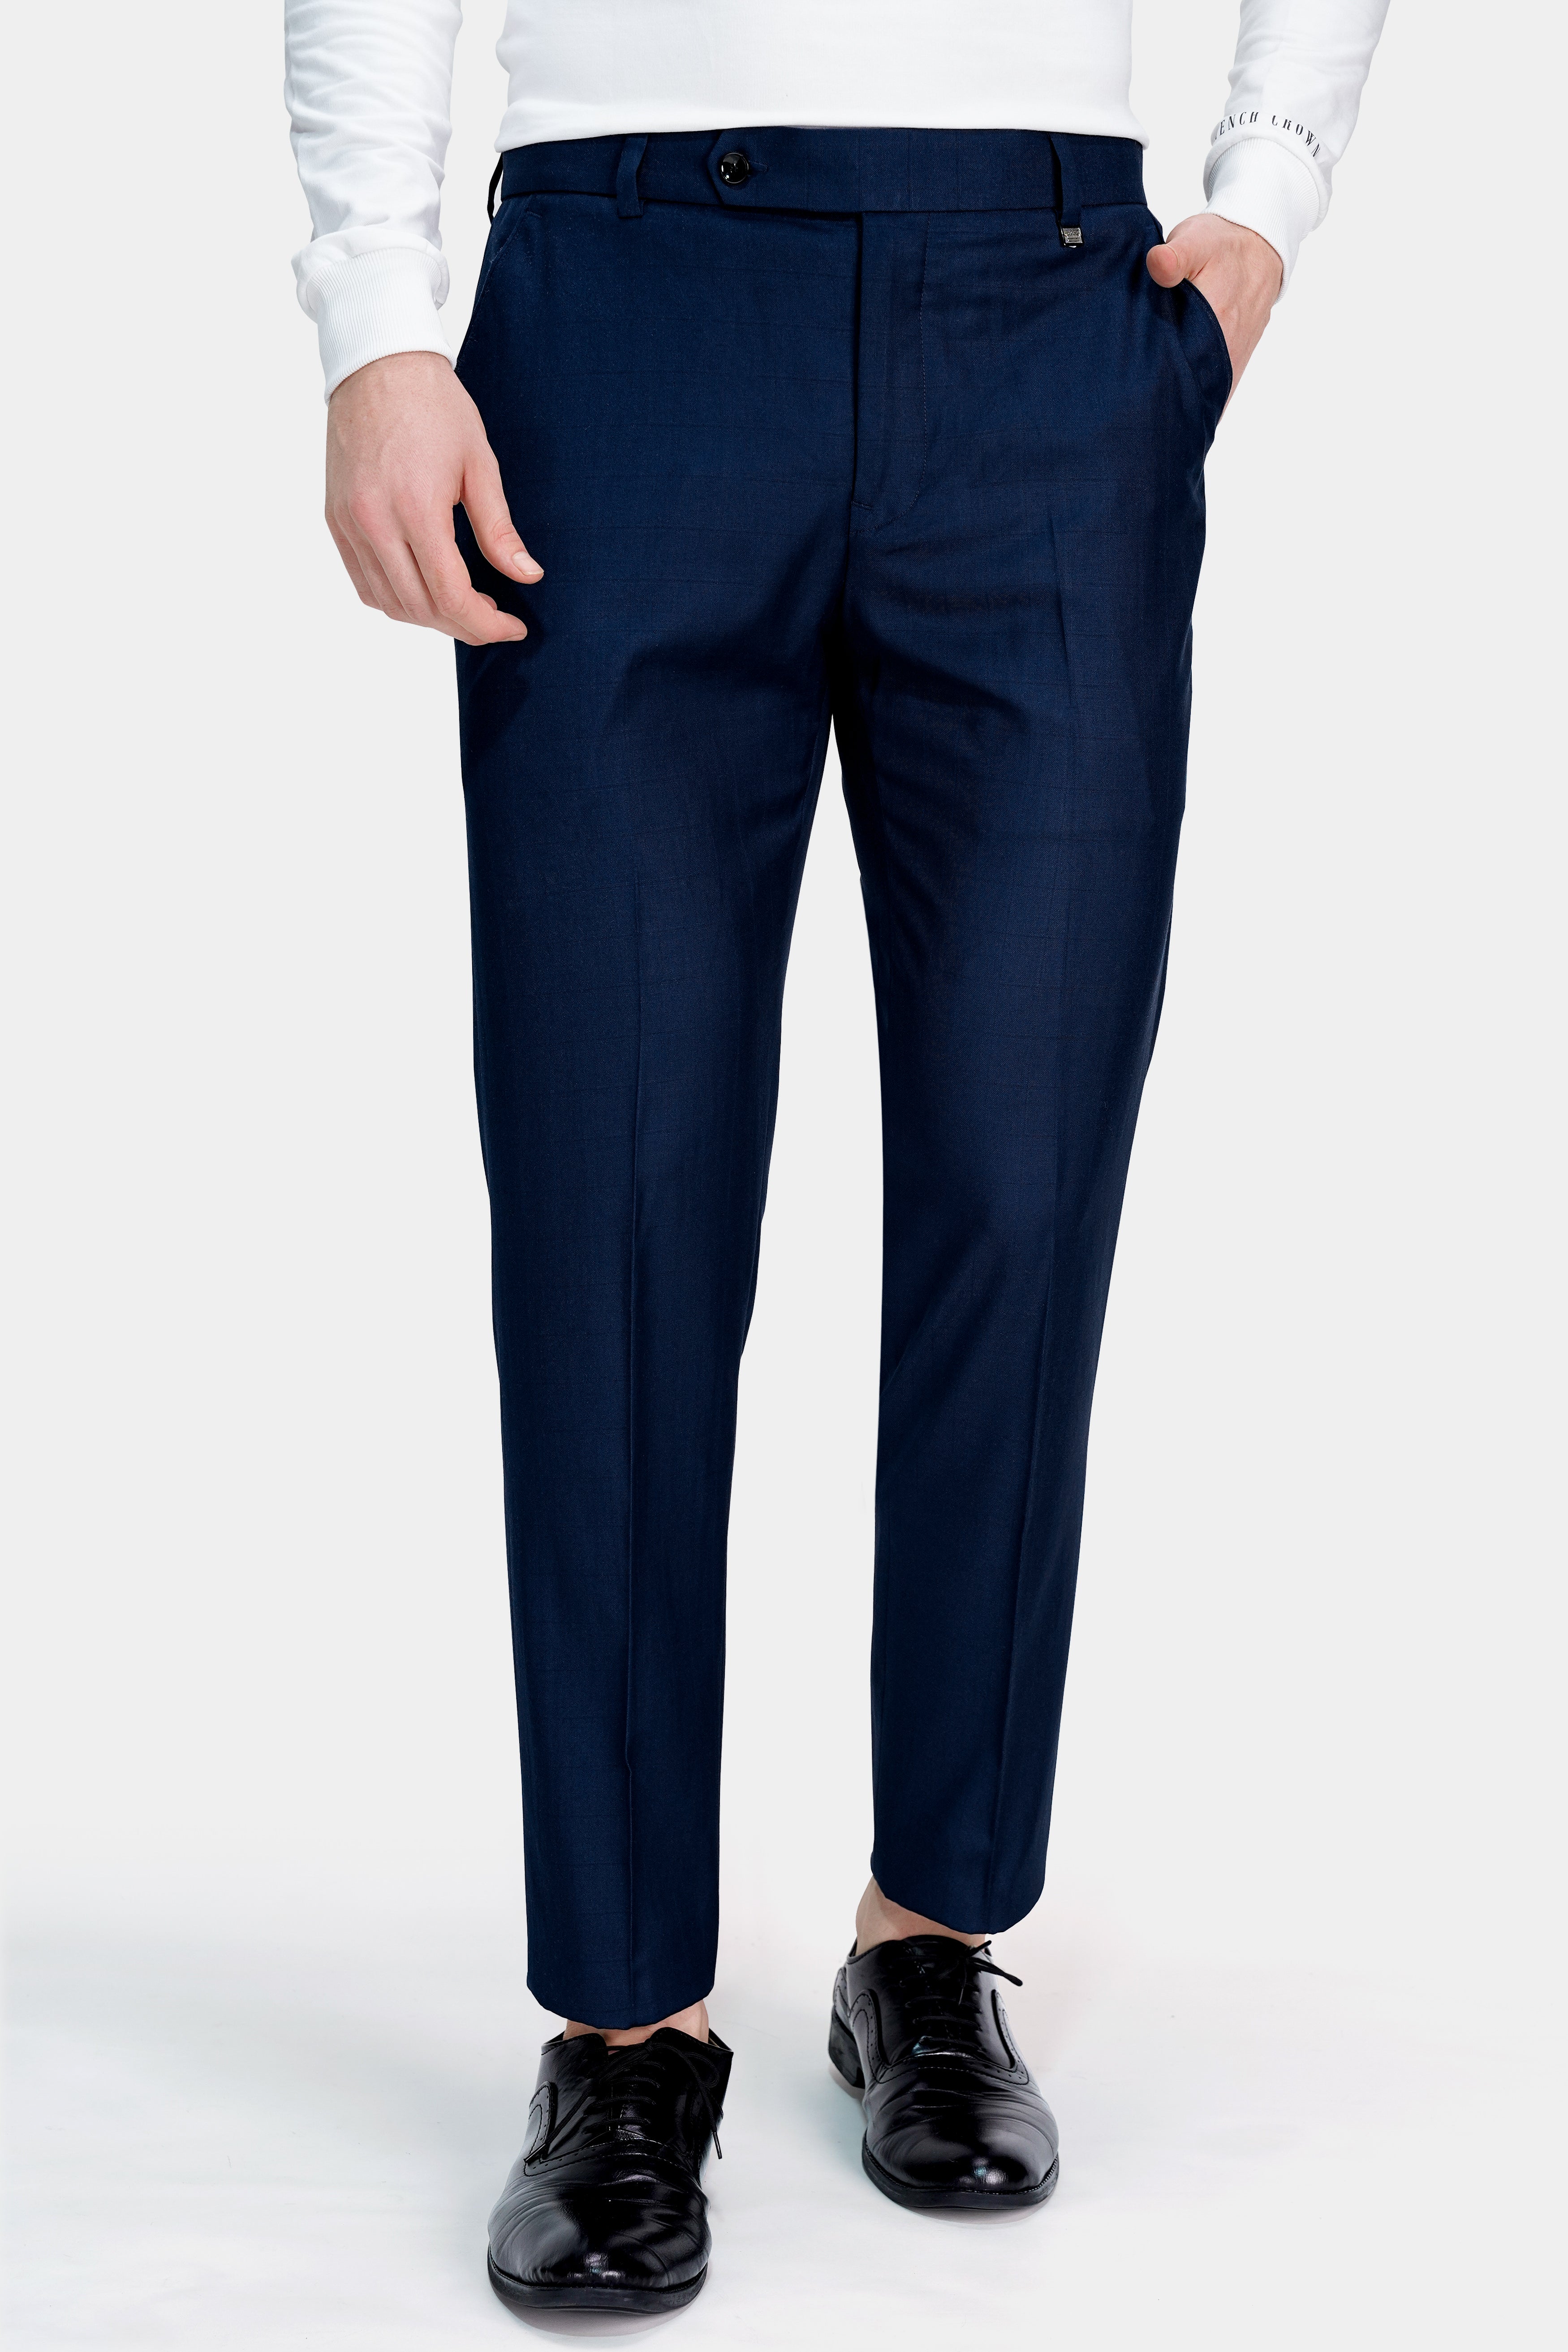 Buy Wool Pants For Men in India - Choose Suitable Sizes, Patterns and Colors